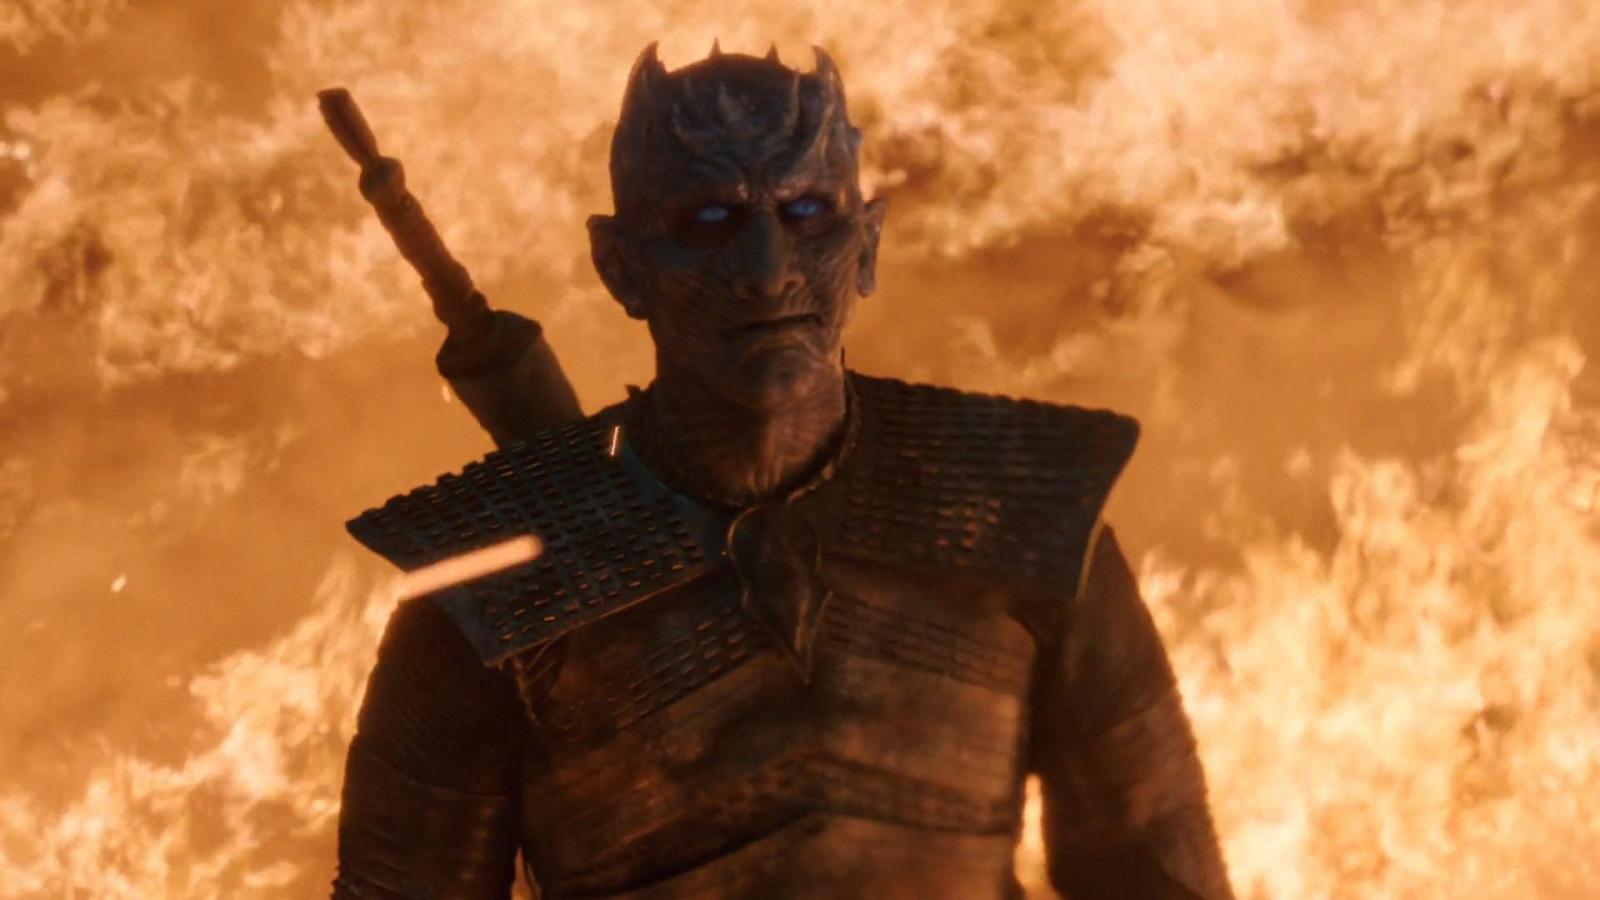 5 Biggest Game of Thrones Fails That Made Season 8 Irredeemable - image 1